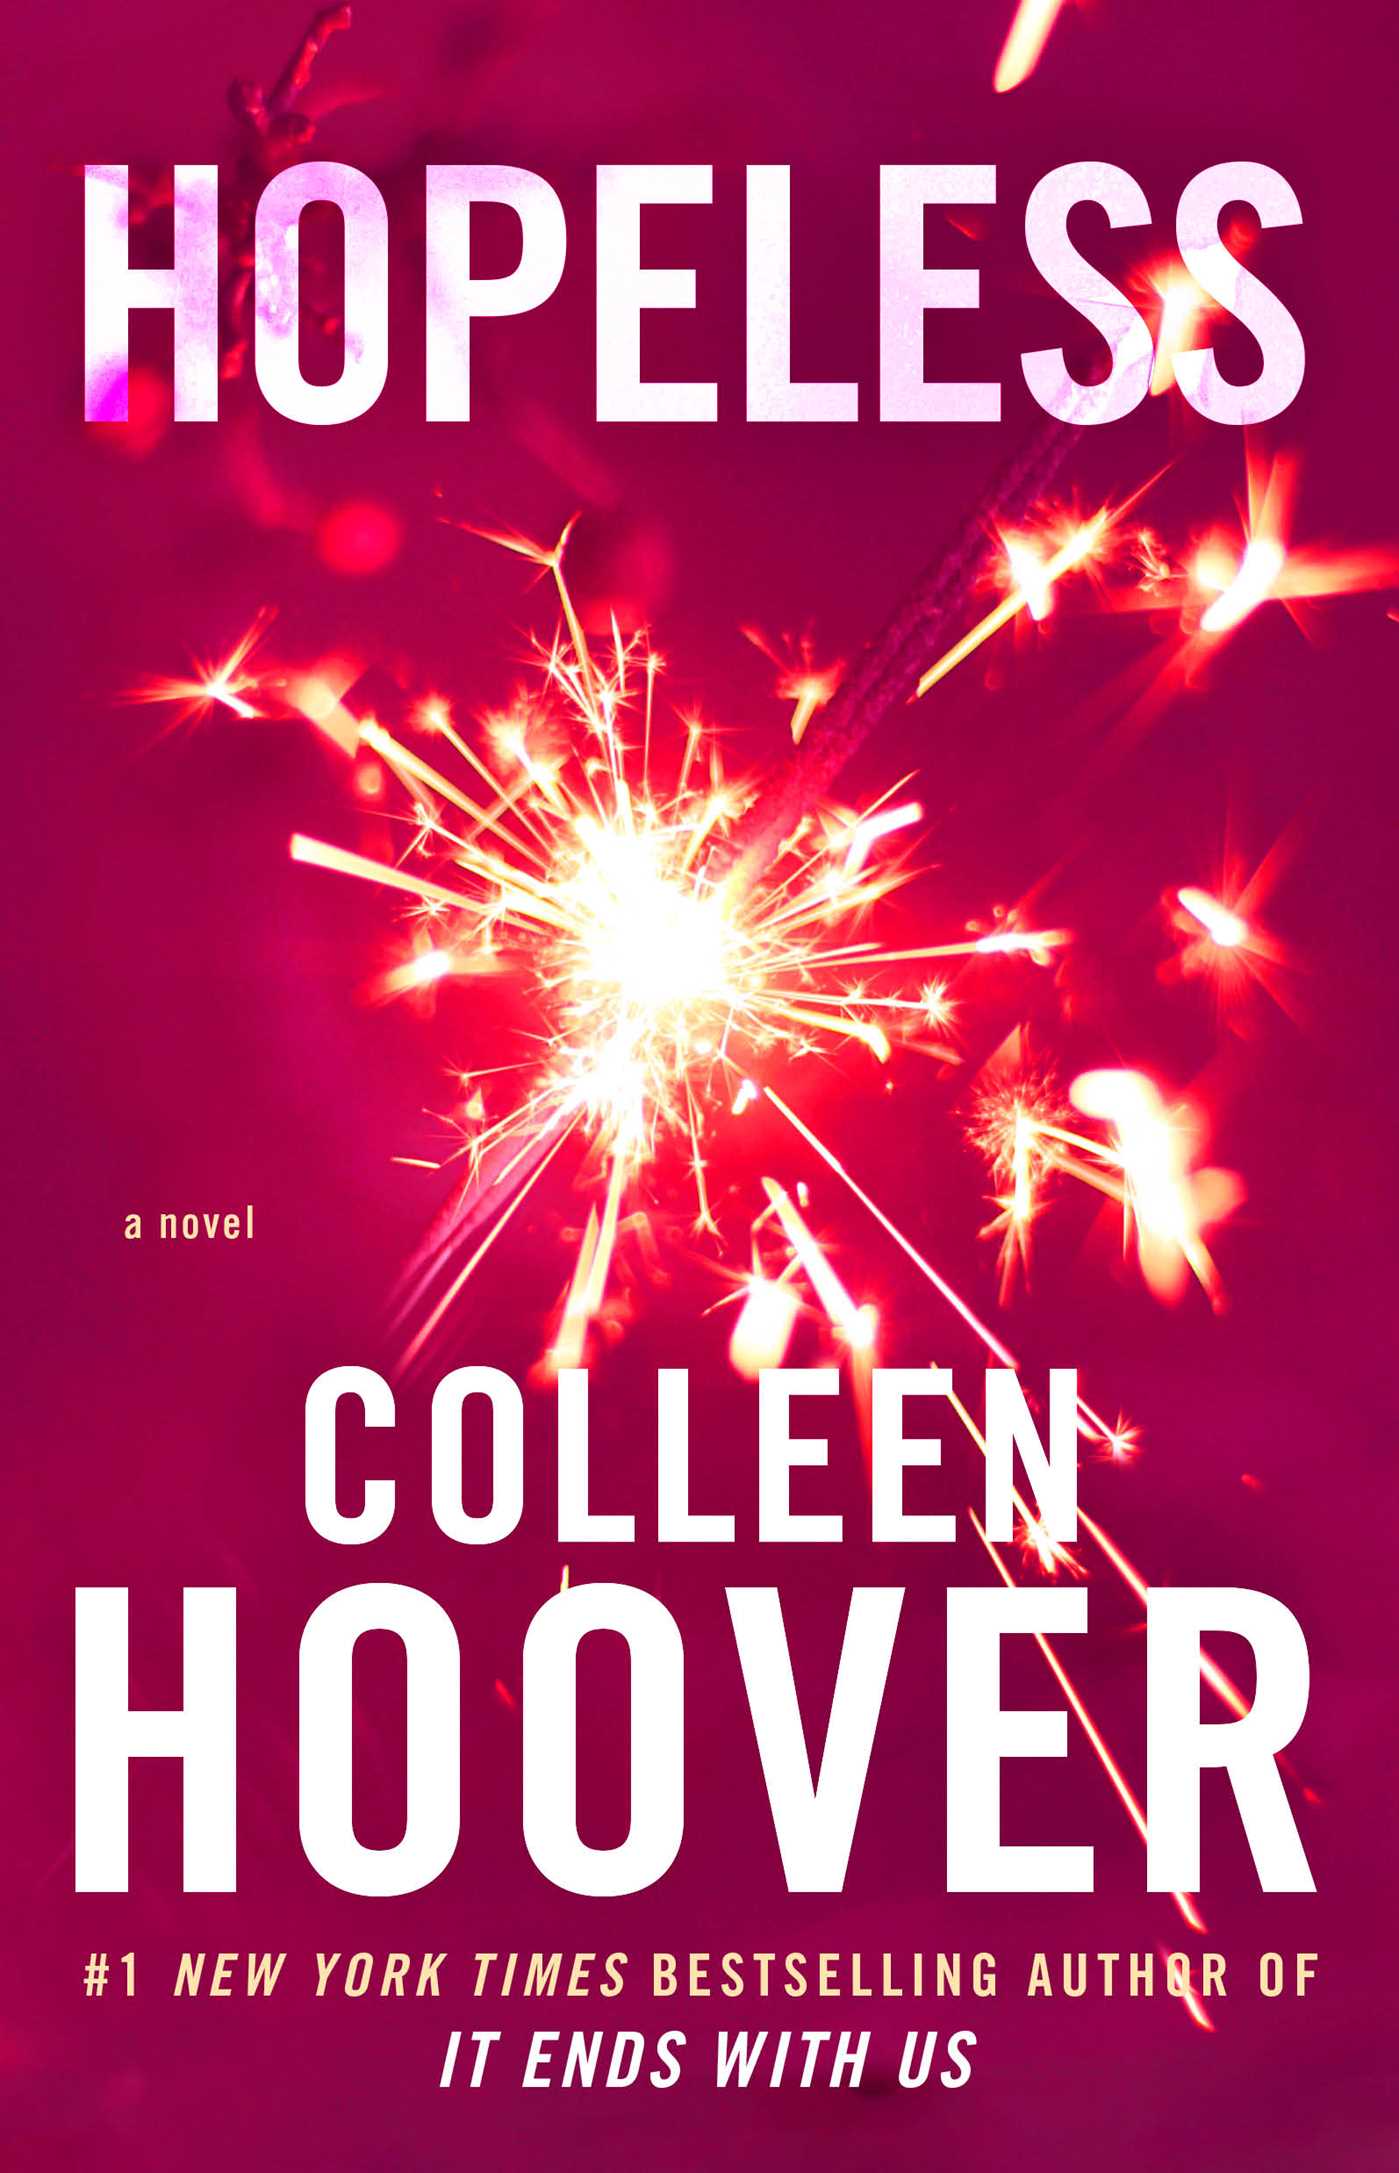 A Raw and Emotional Journey - "Hopeless" by Colleen Hoover